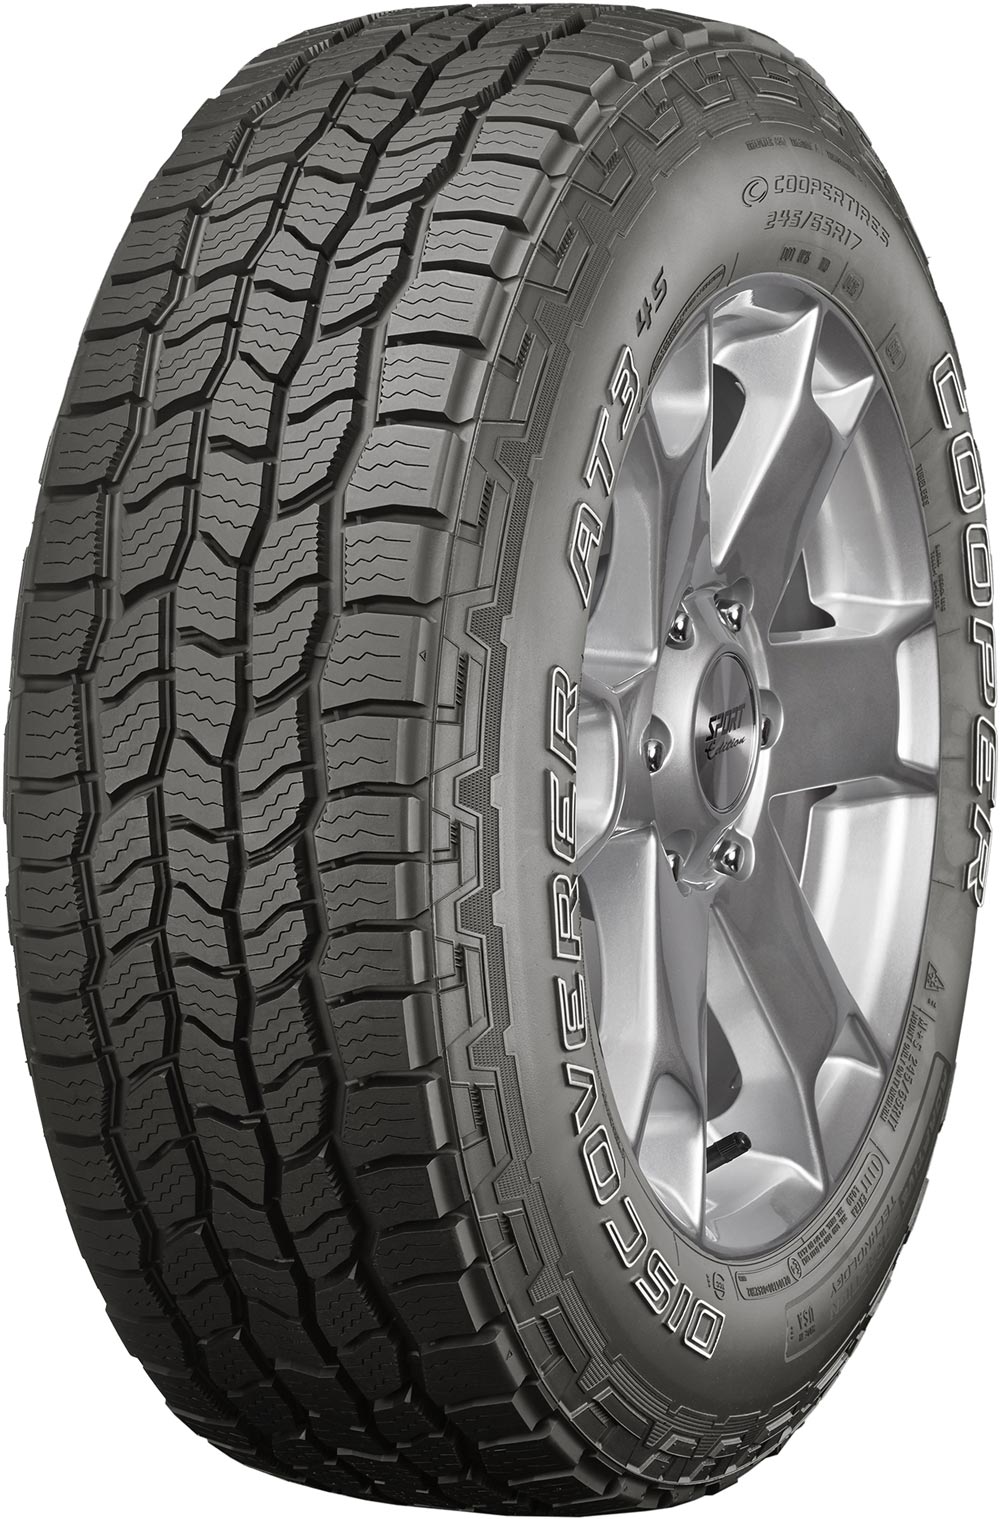 Гуми за джип COOPER DISCOVERER AT3 4S OWL 285/70 R17 117T